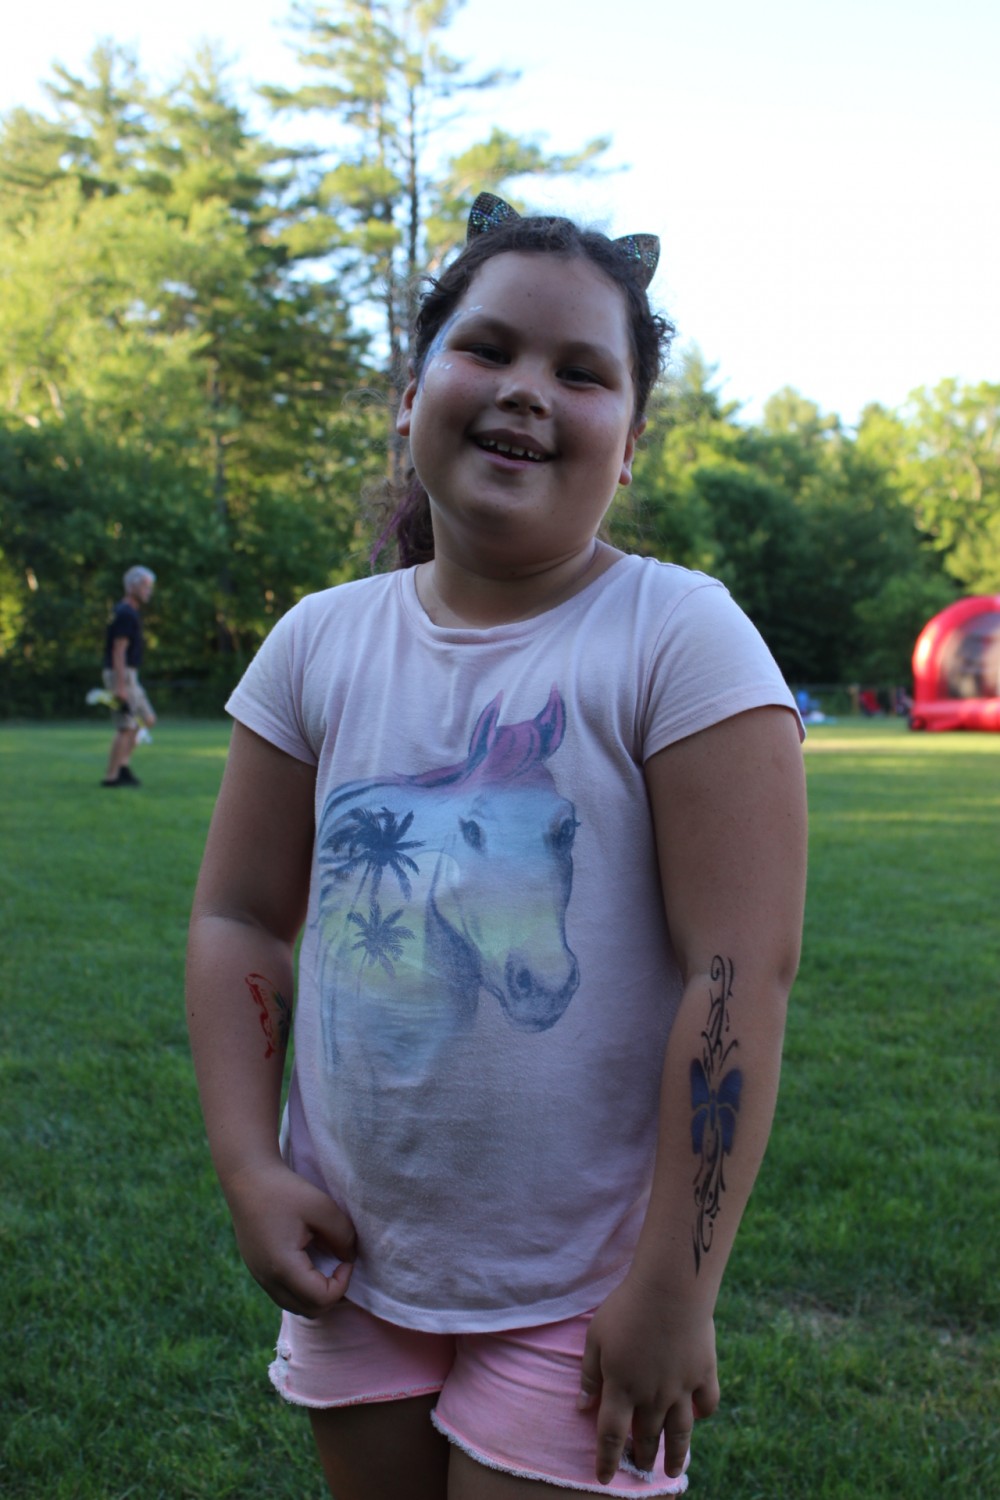 Loving her airbrush tattoos that were done at Canton Parks on 6/26/22!